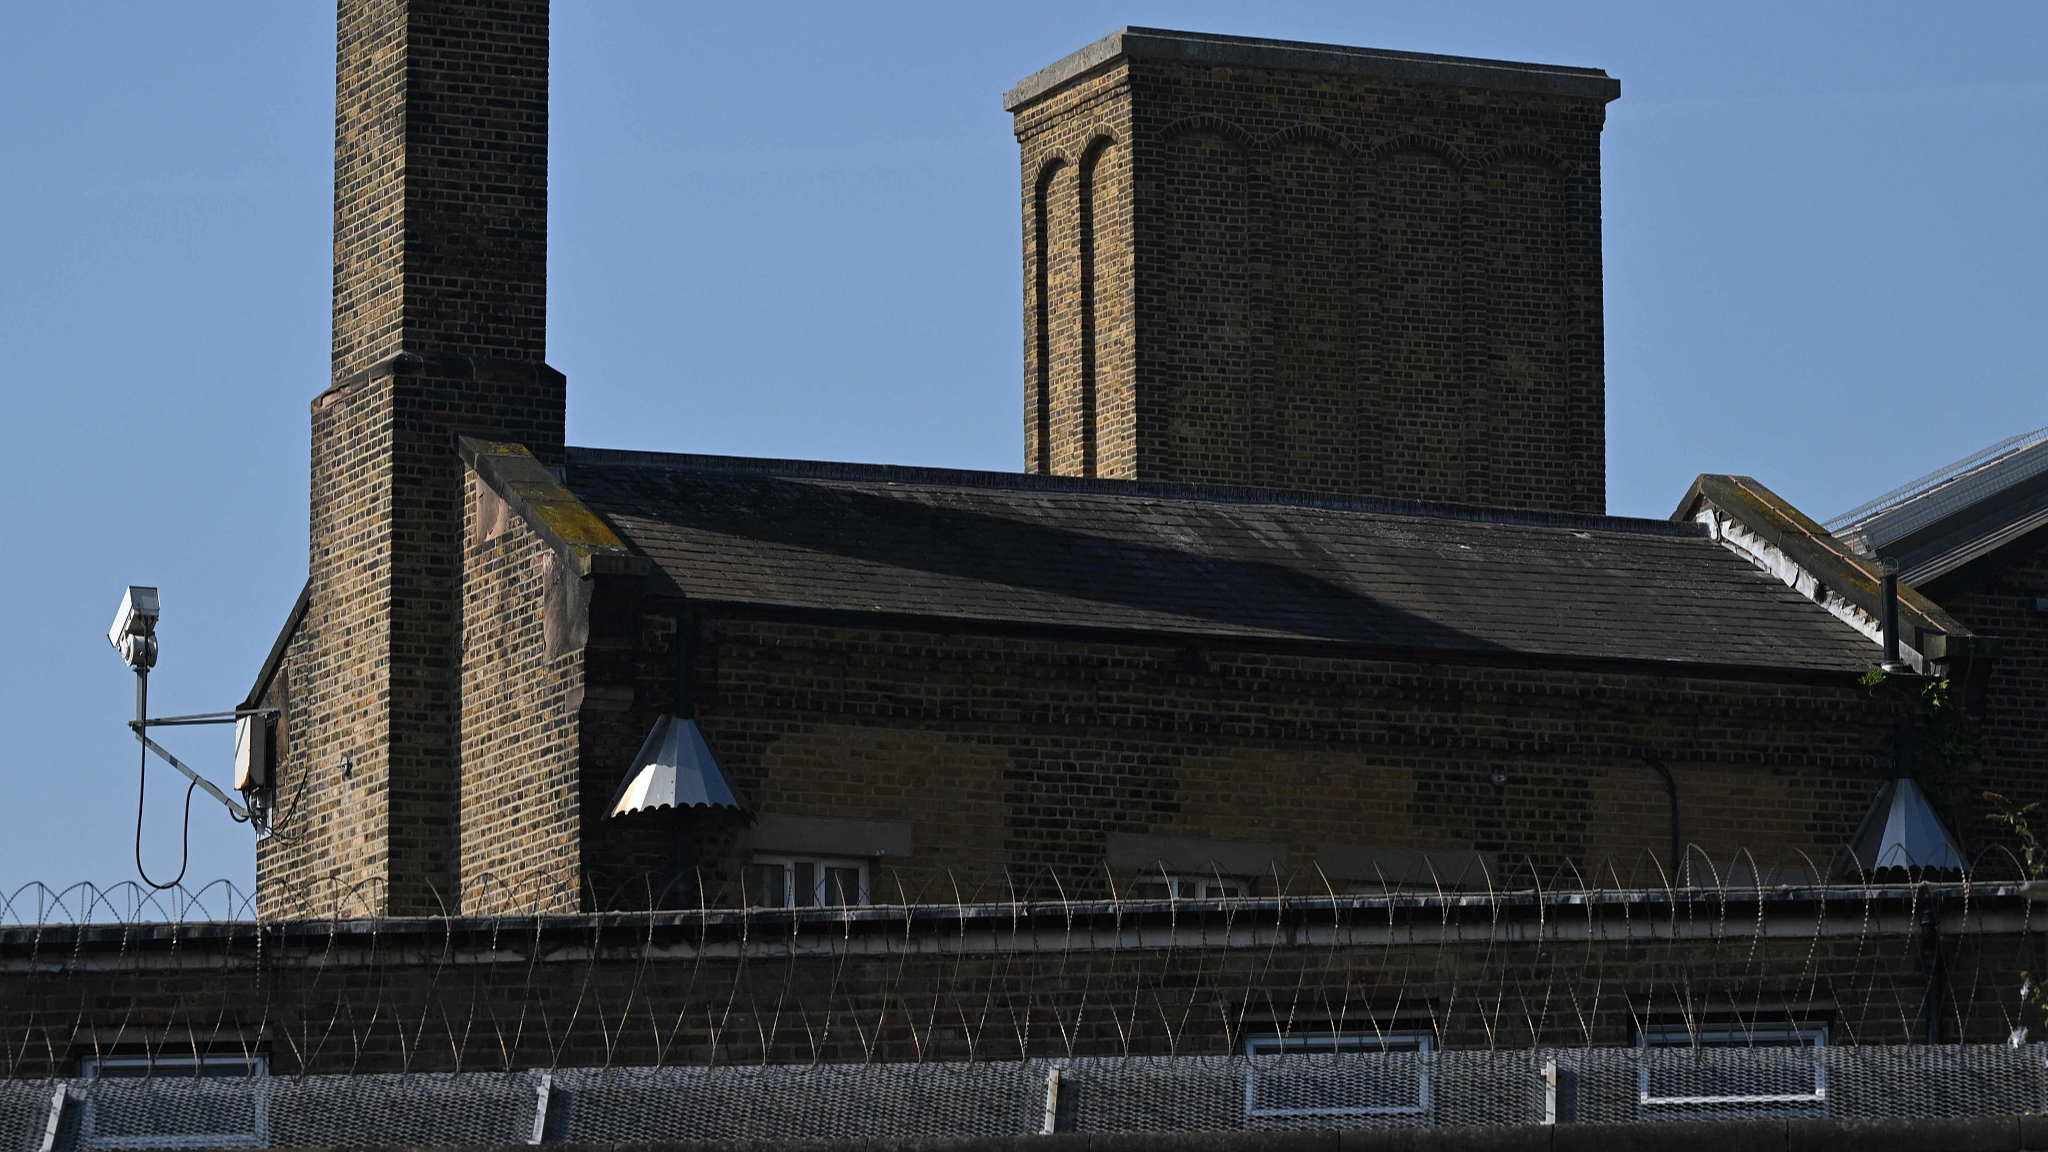 Razor wire is seen stretching along the top of the walls of HM Prison Wandsworth in south London on September 7, 2023. /CFP